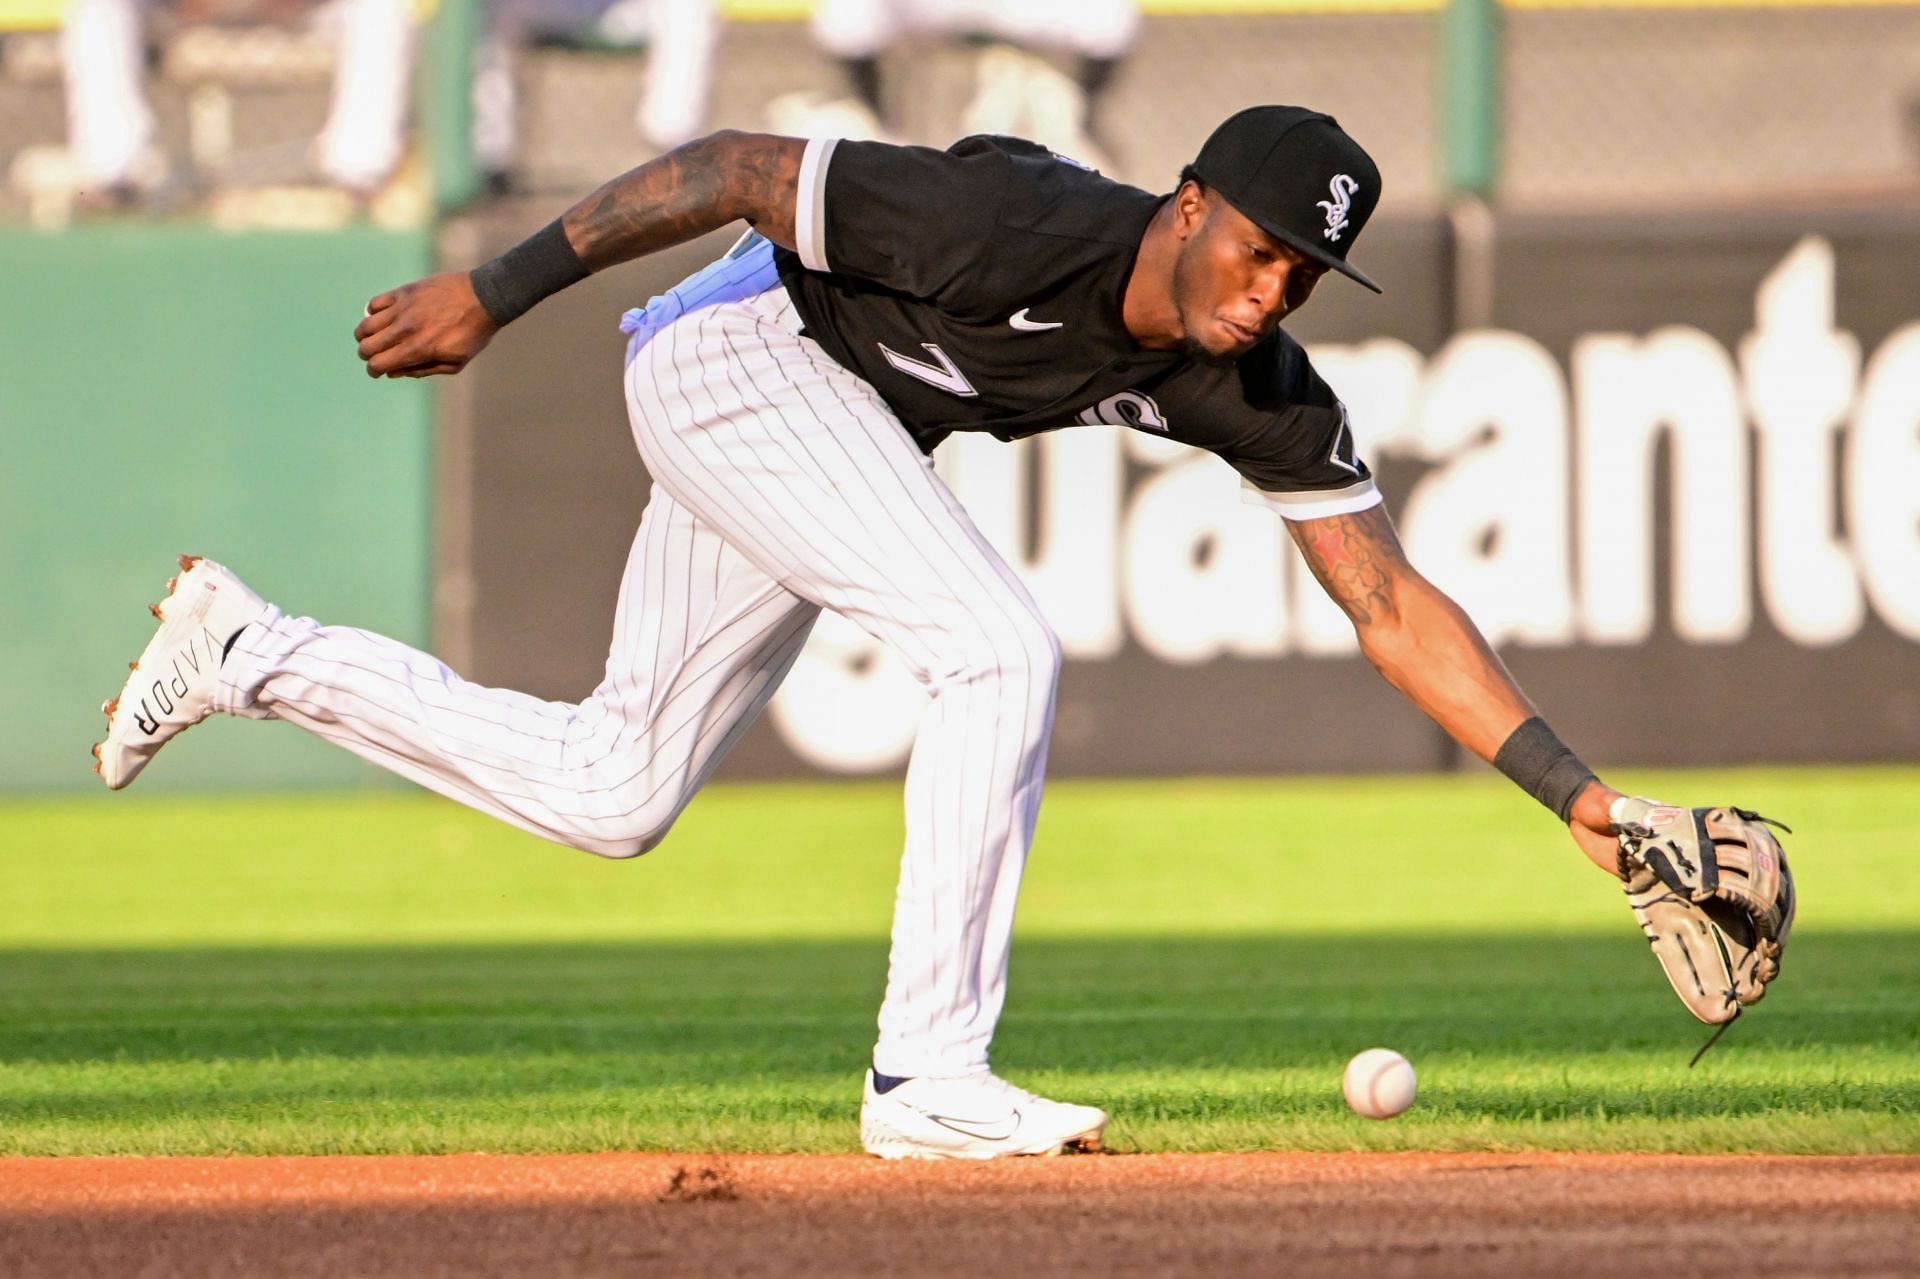 White Sox place SS Tim Anderson on the 10 Day IL - Diamond Digest